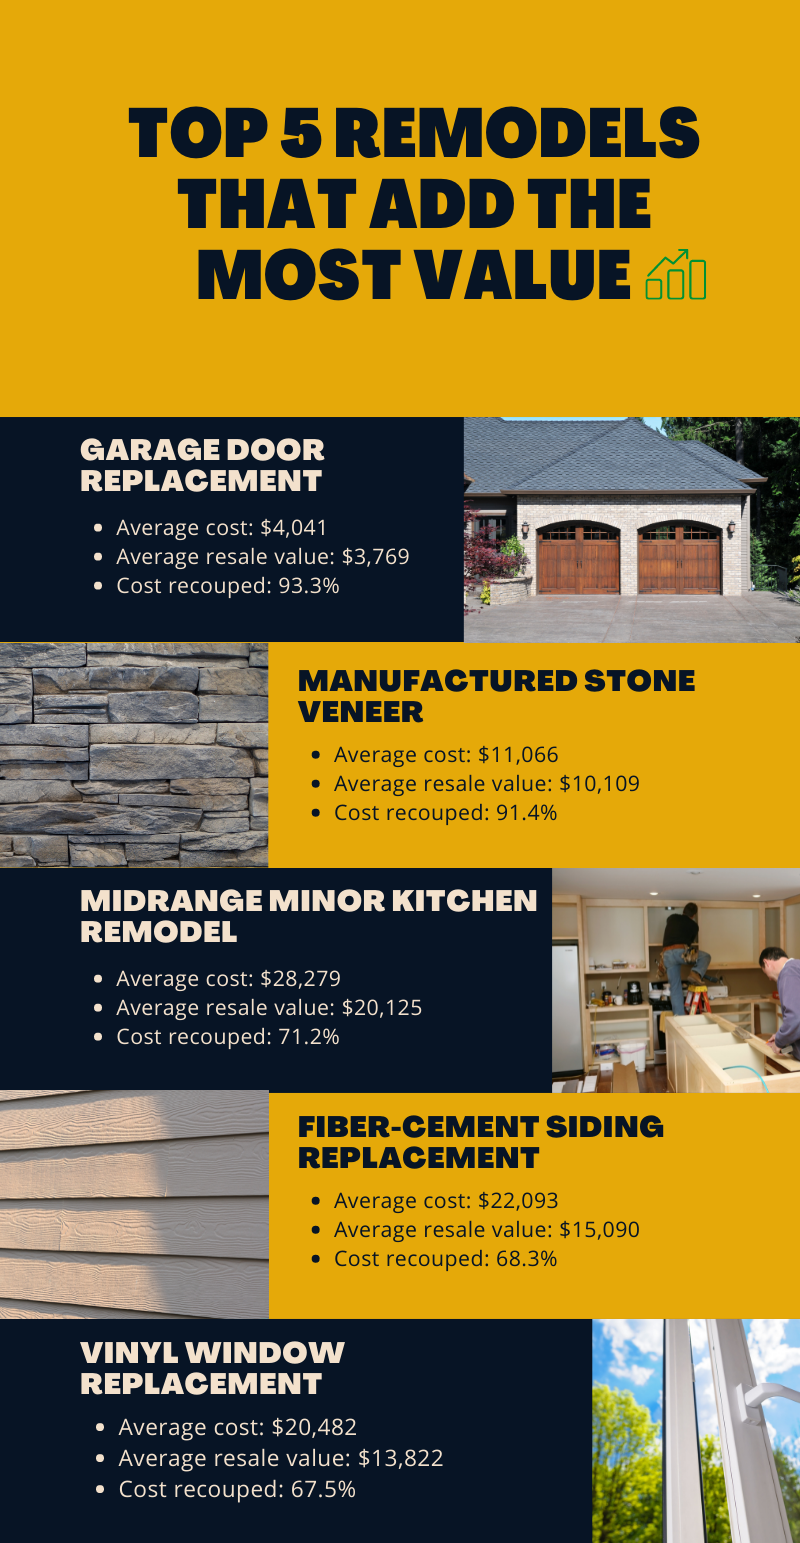 top 5 remodels that add the most value infographic